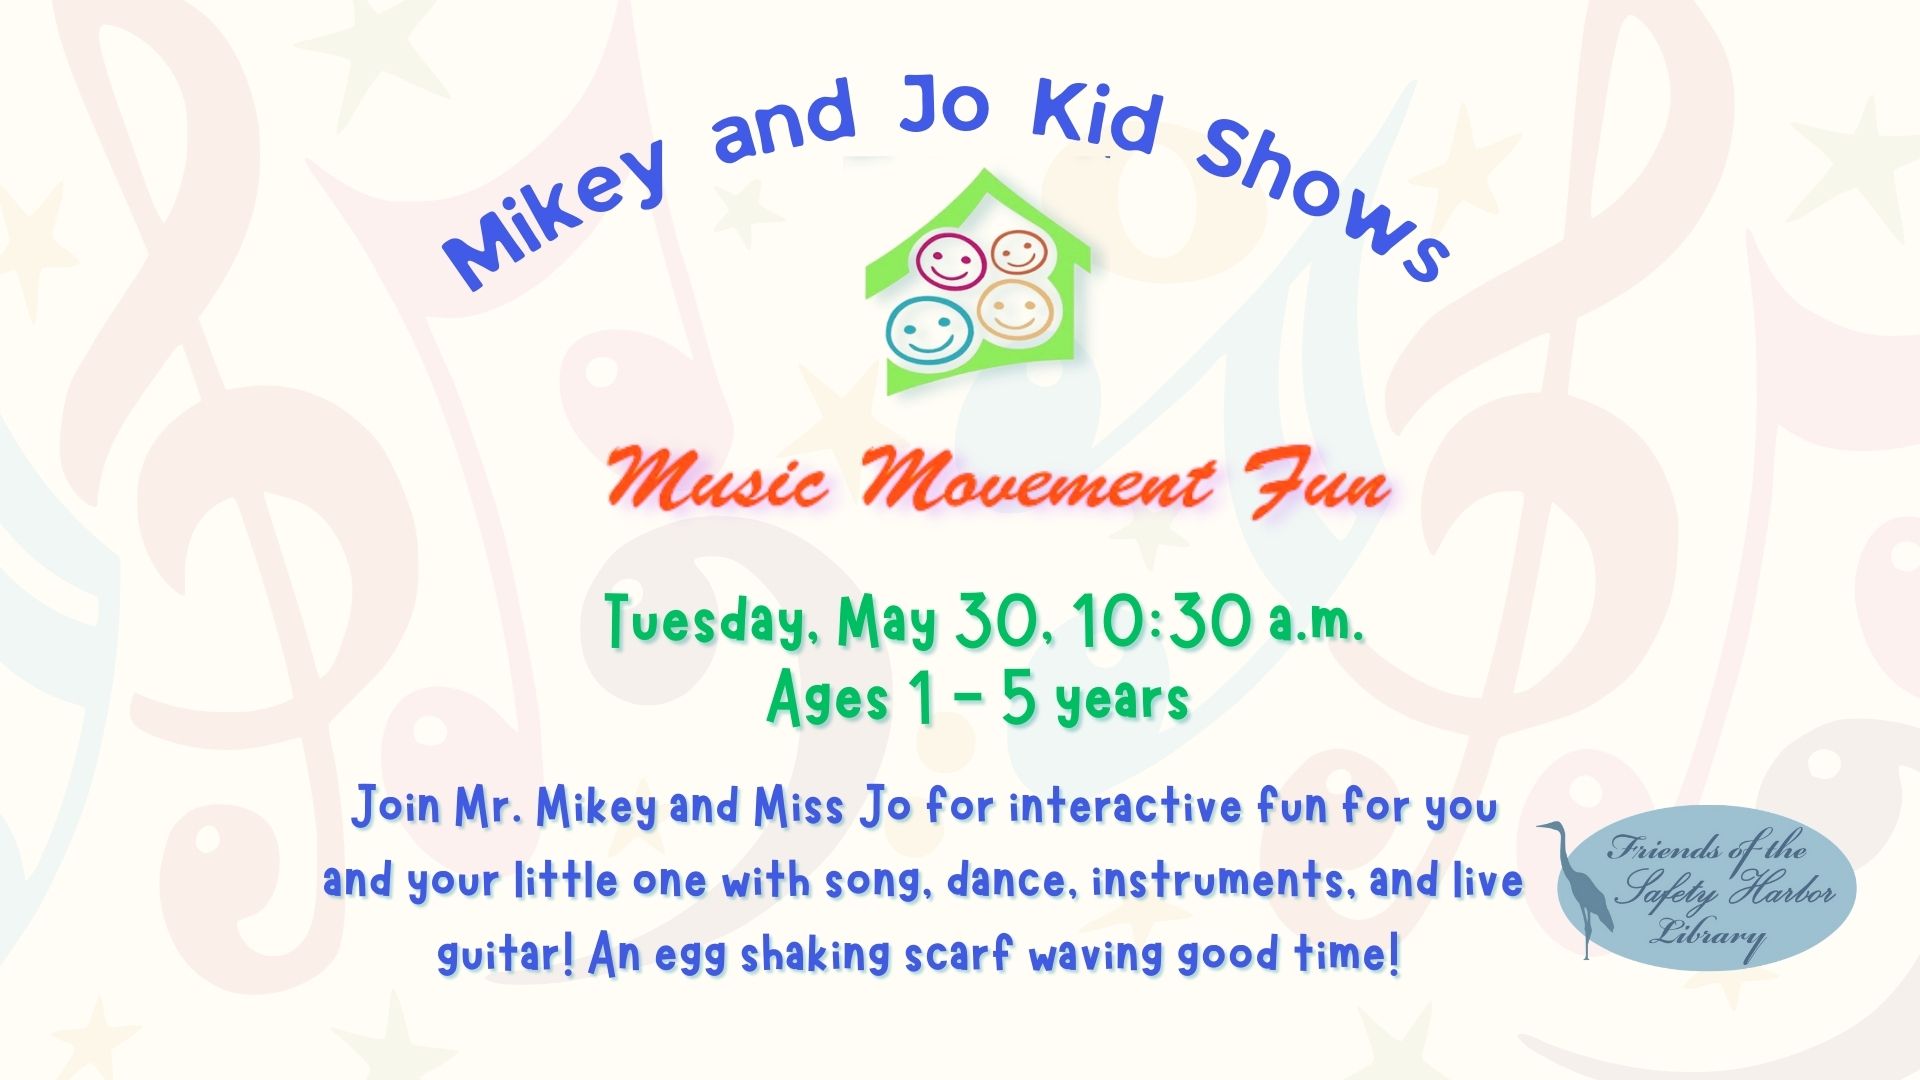 Mikey & Jo Kid shows